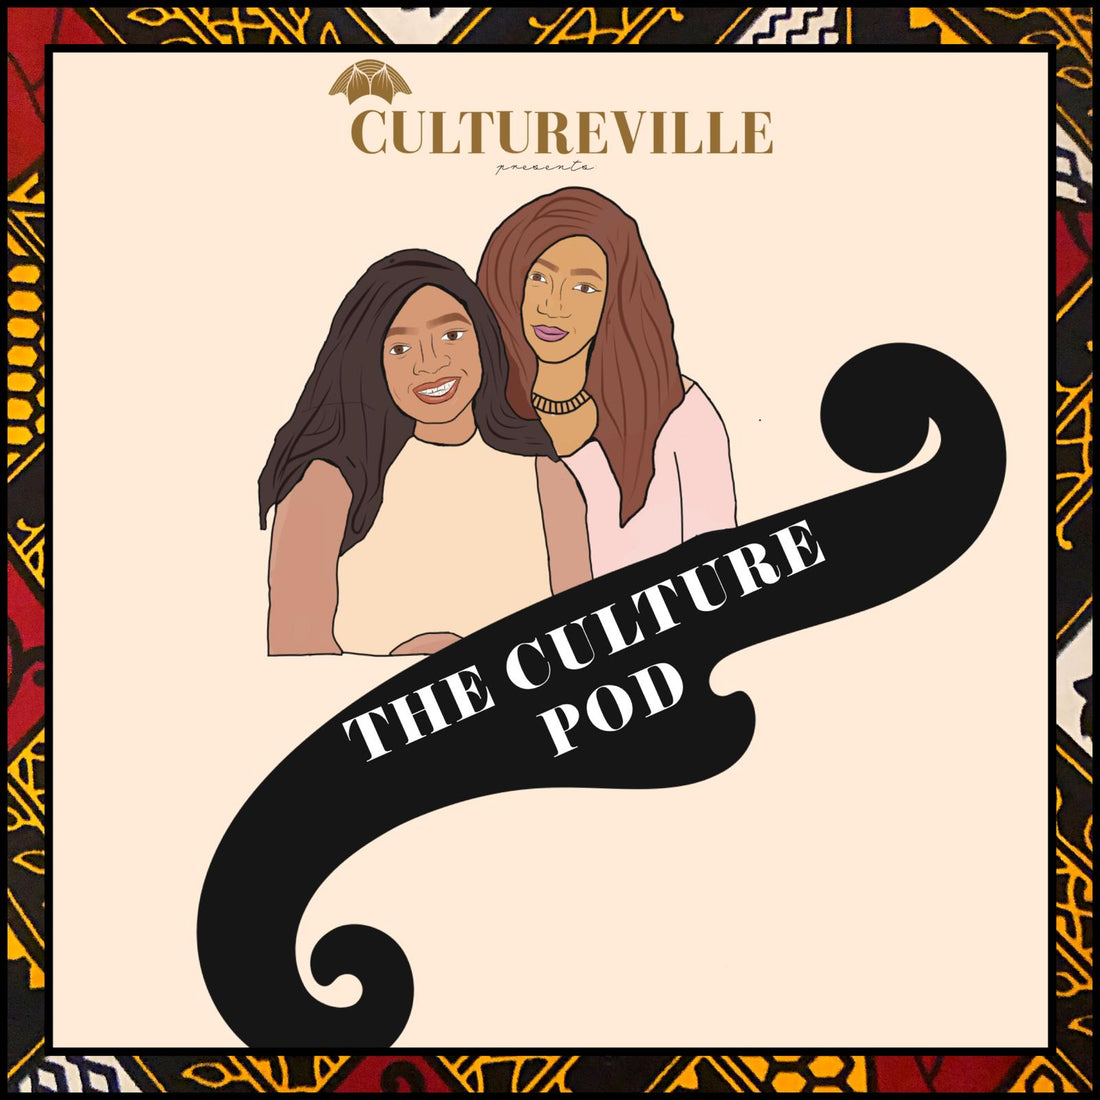 Culture Pod : Season 2 Episode 4 | Use the stones they throw at you to build a house ft Codilia Gapare